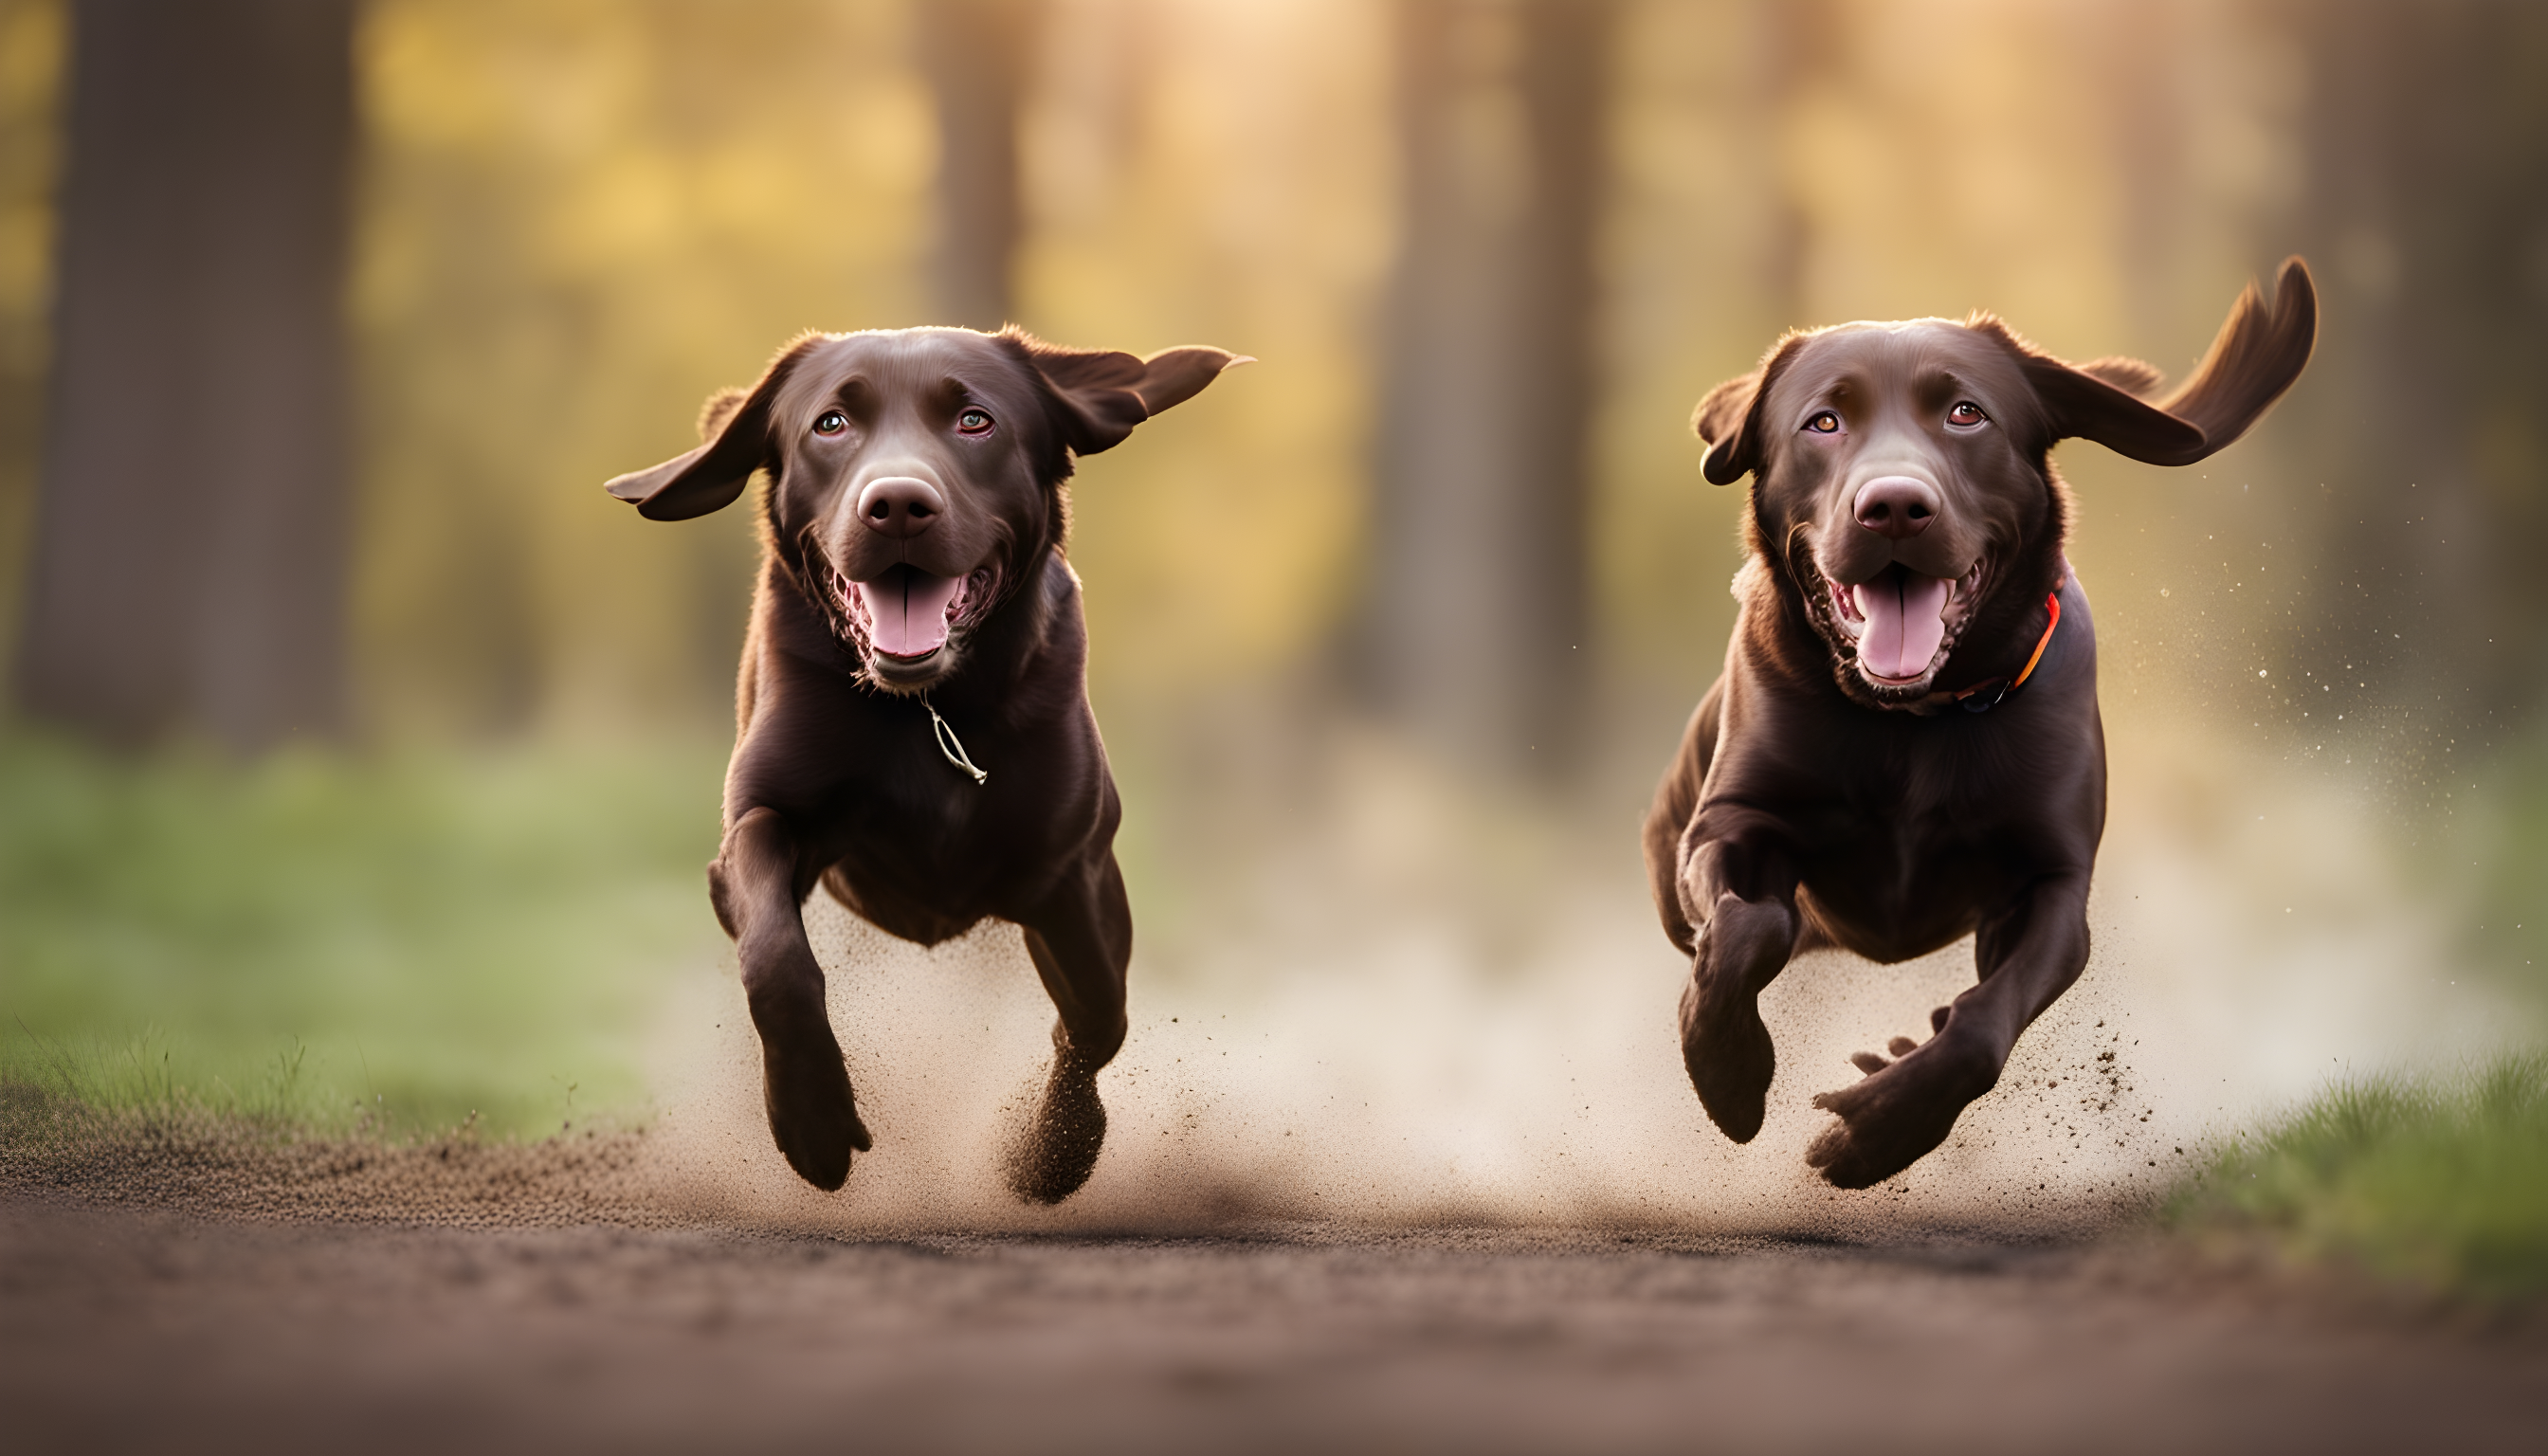 A joyful chocolate lab leaping through the air, frisbee in mouth, epitomizing the active lifestyle these dogs adore